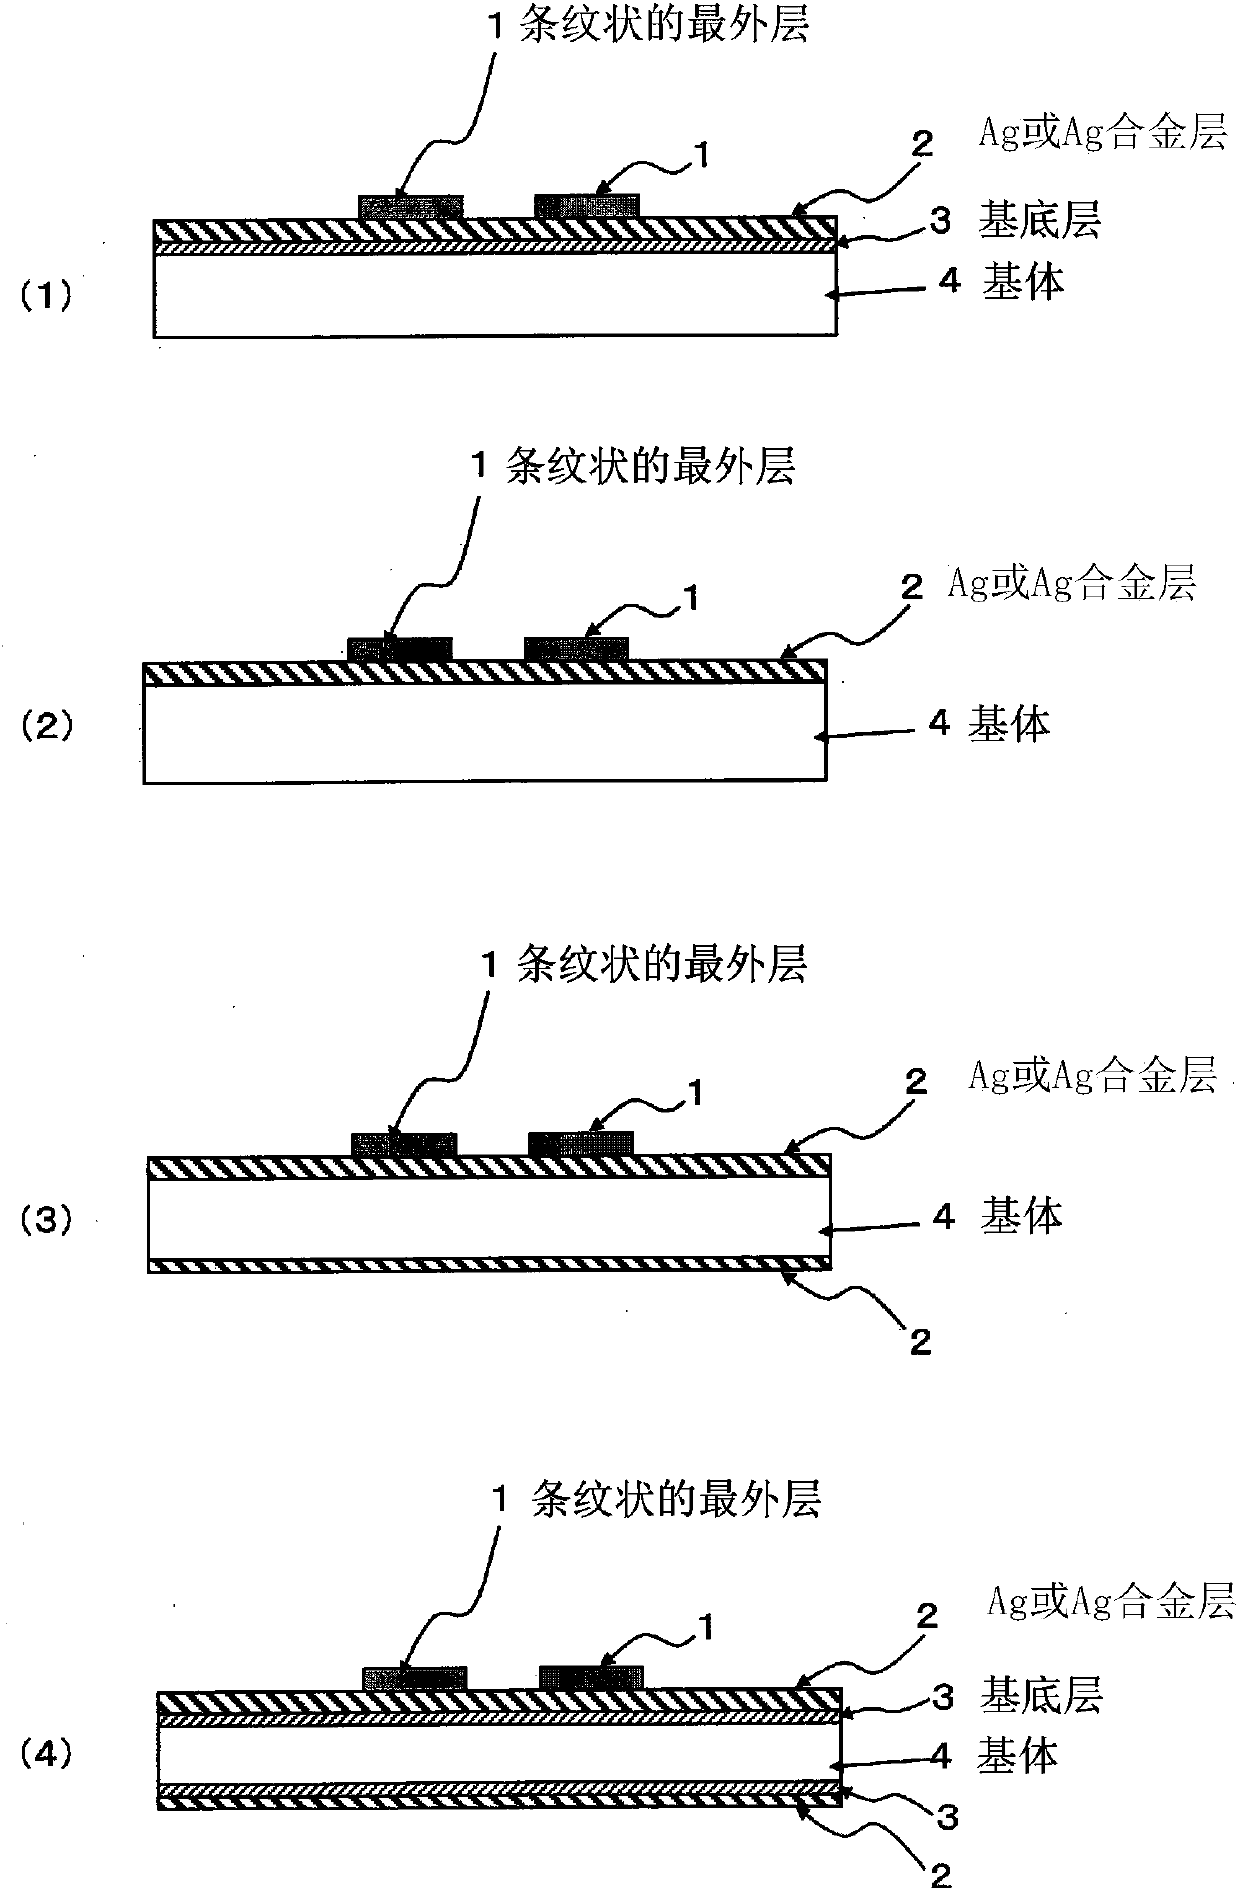 Commutator material, method for manufacturing same, and micromotor using same